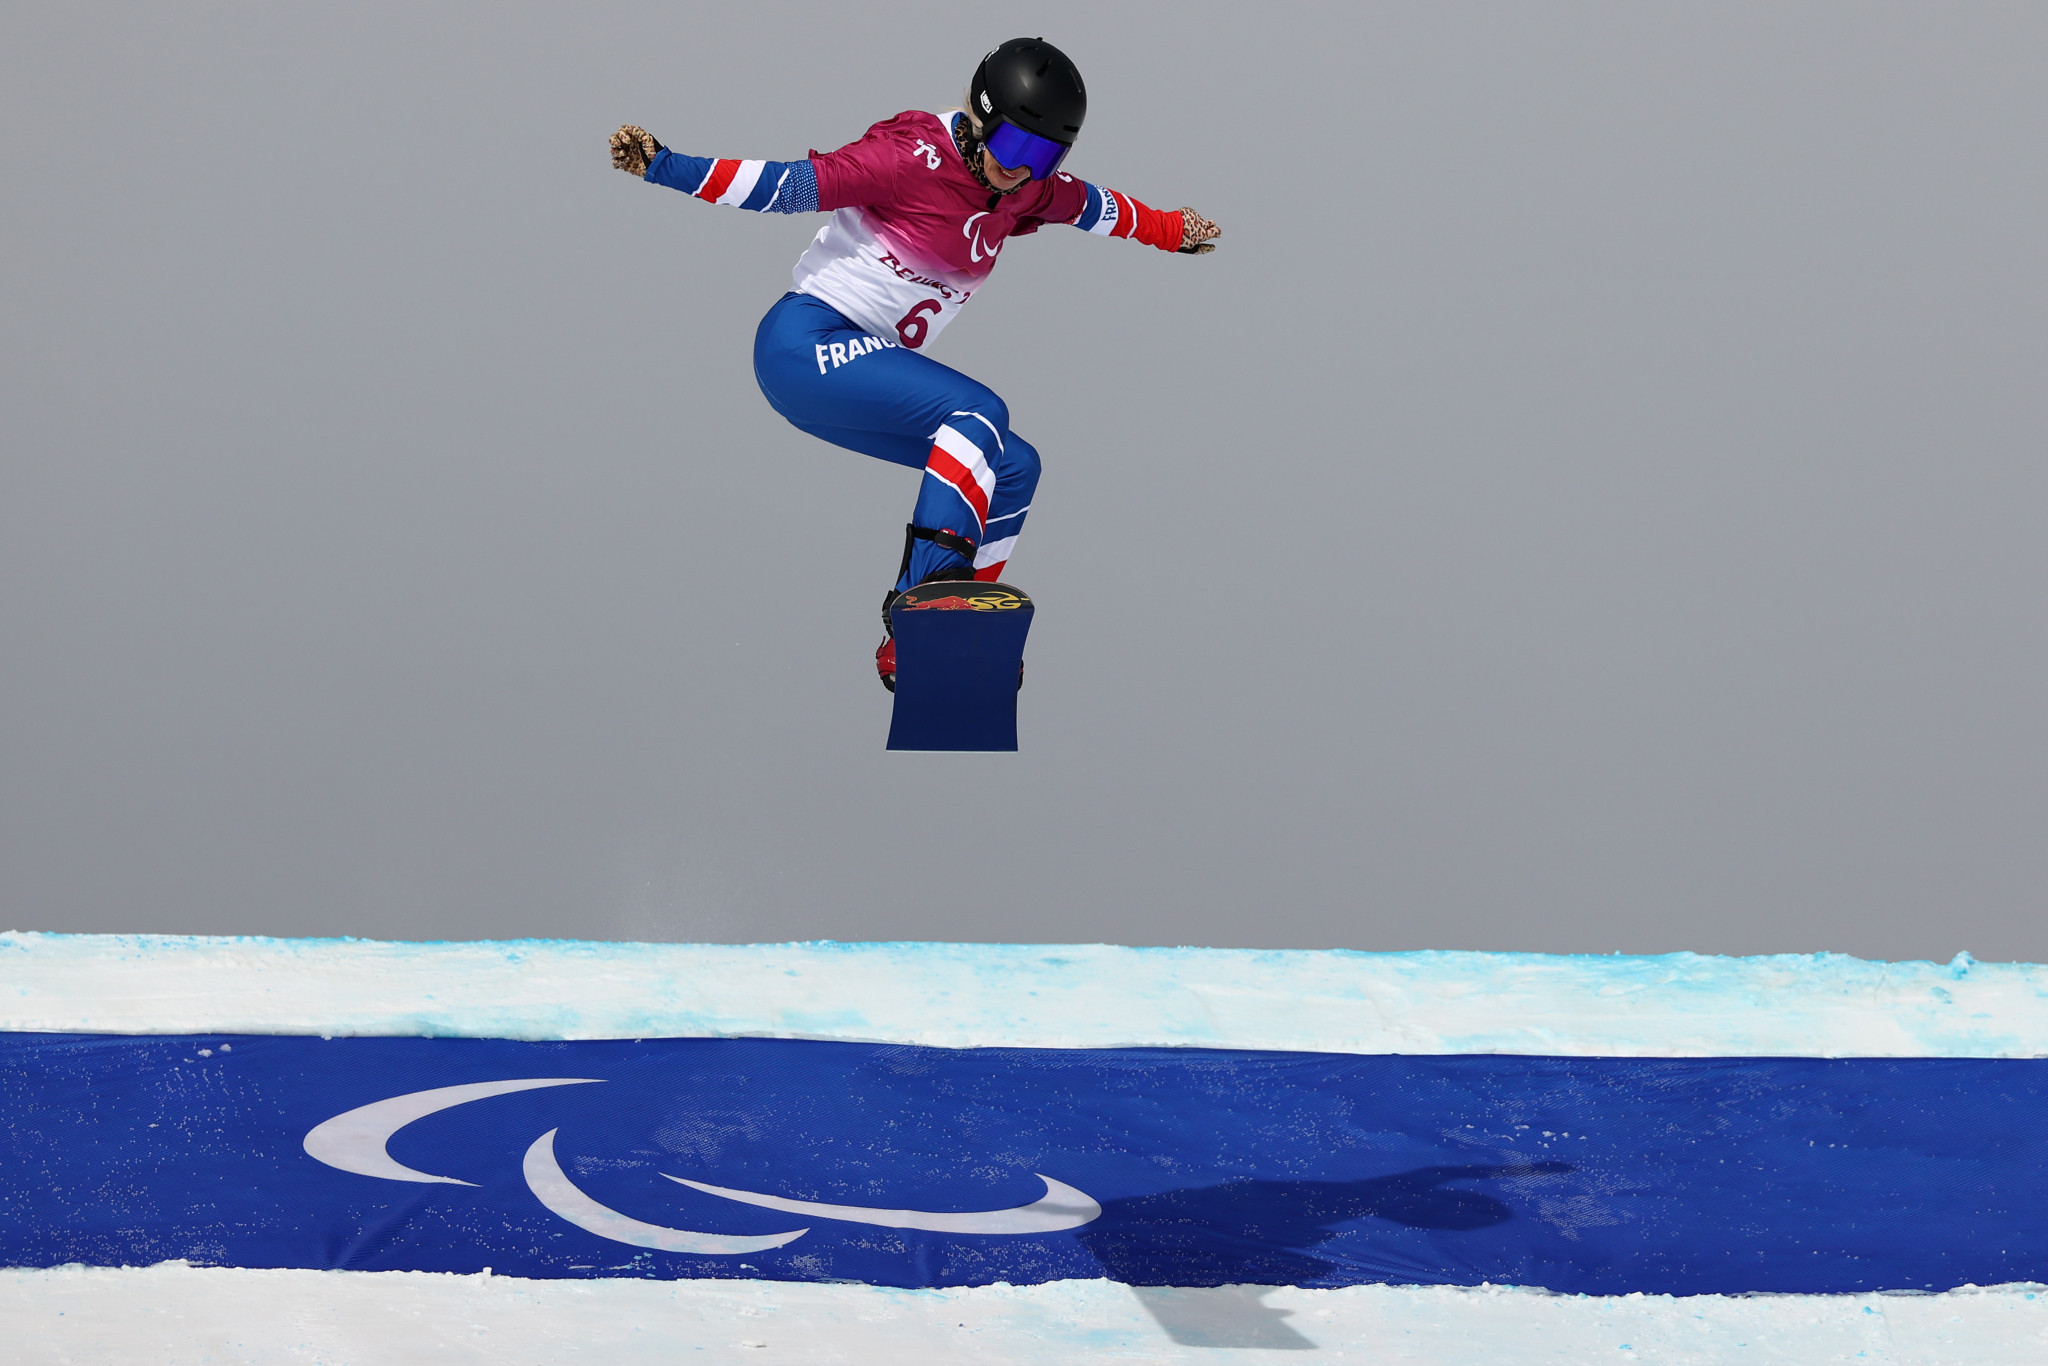 Para snowboard now comes under the remit of the FIS ©Getty Images